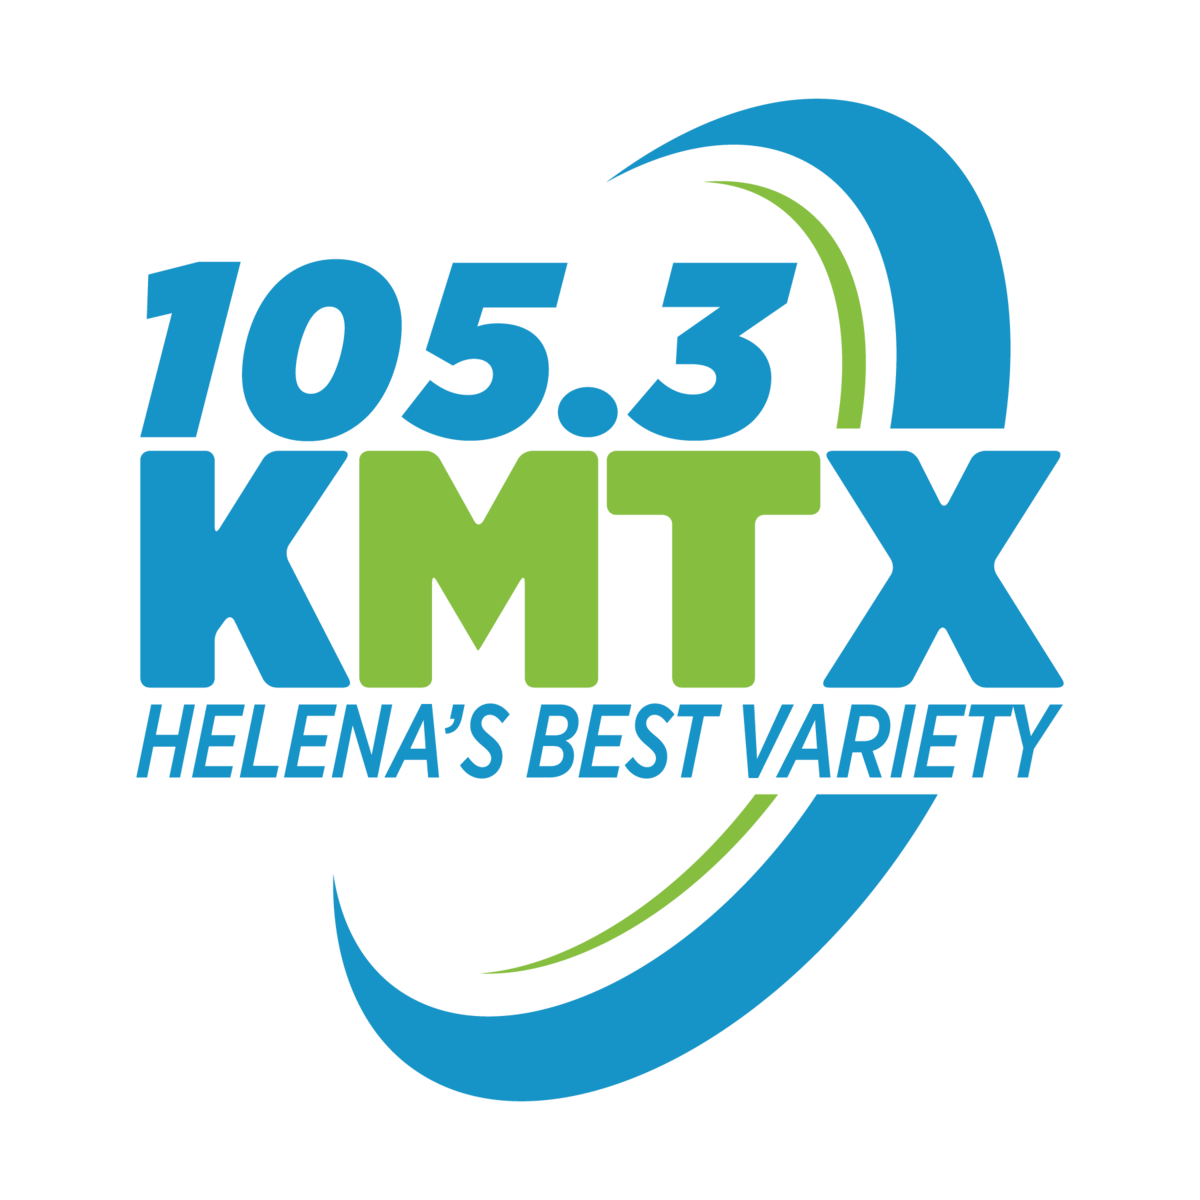 Contests | 105.3 KMTX Adult Contemporary | Helena, MT